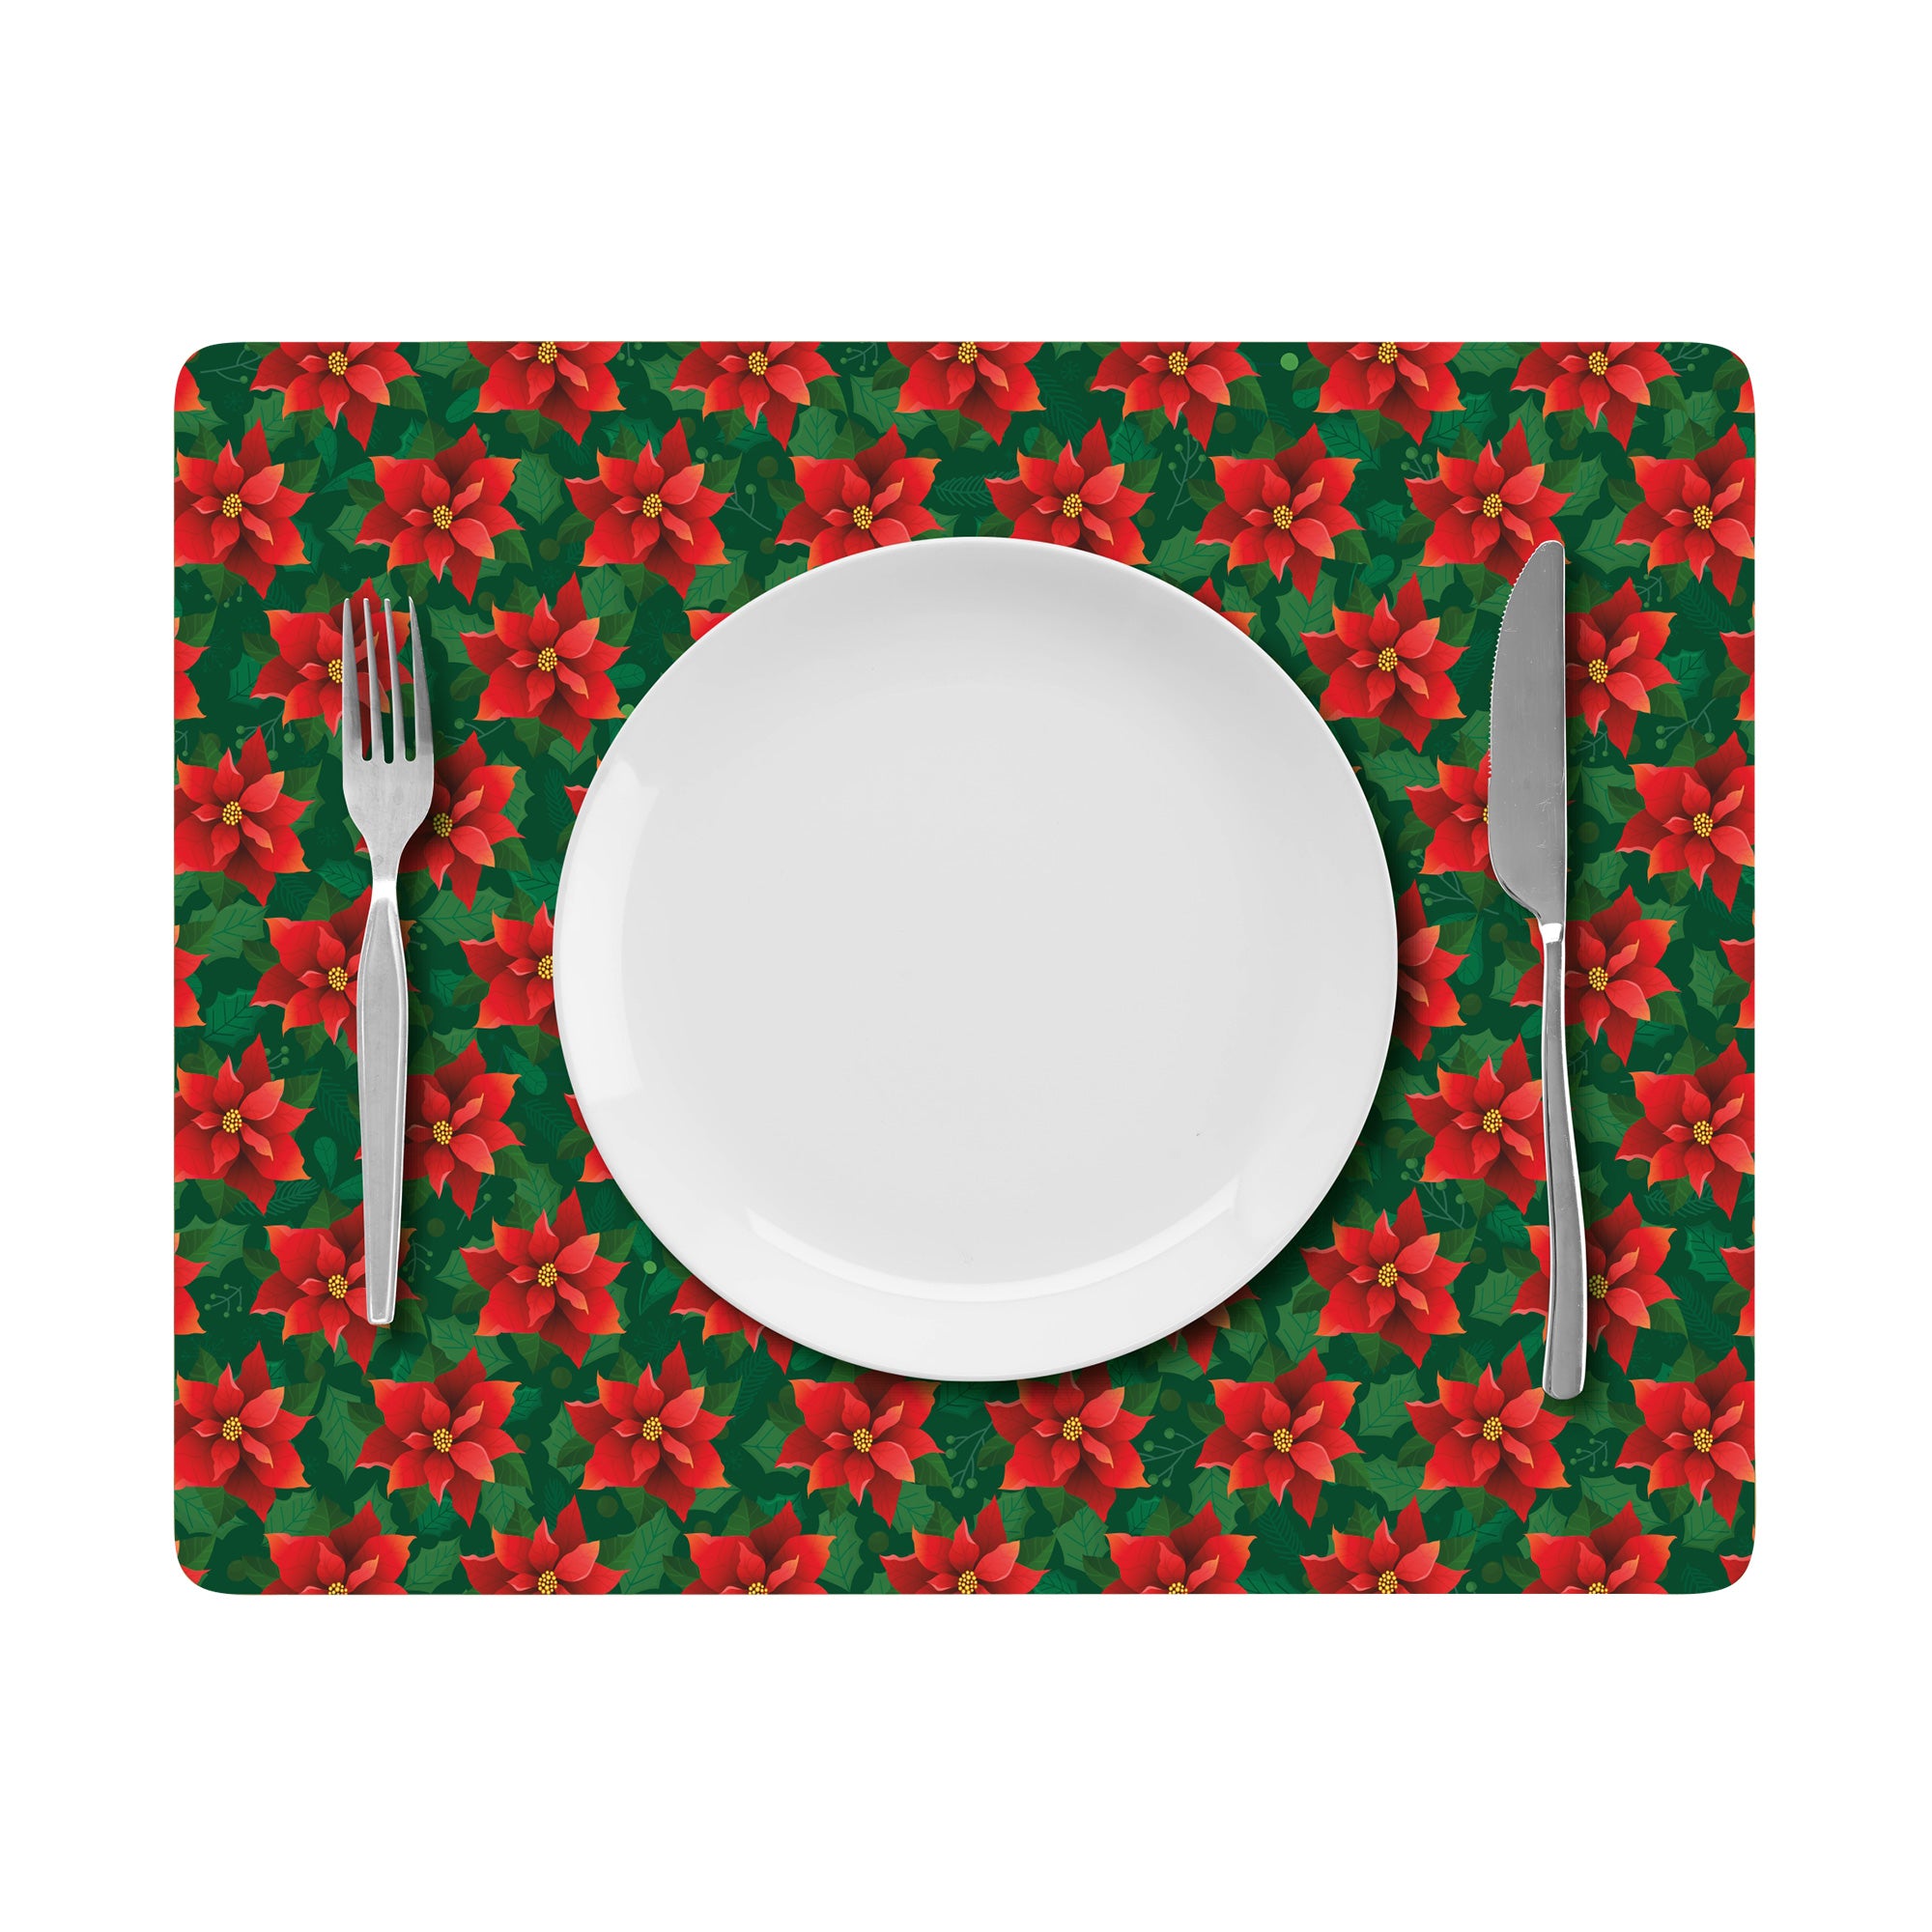 Foil Printed Christmas Placemat & Coaster Set - W12 x H15 inches,W4 x H4 inches, Poinsettia, 6pc